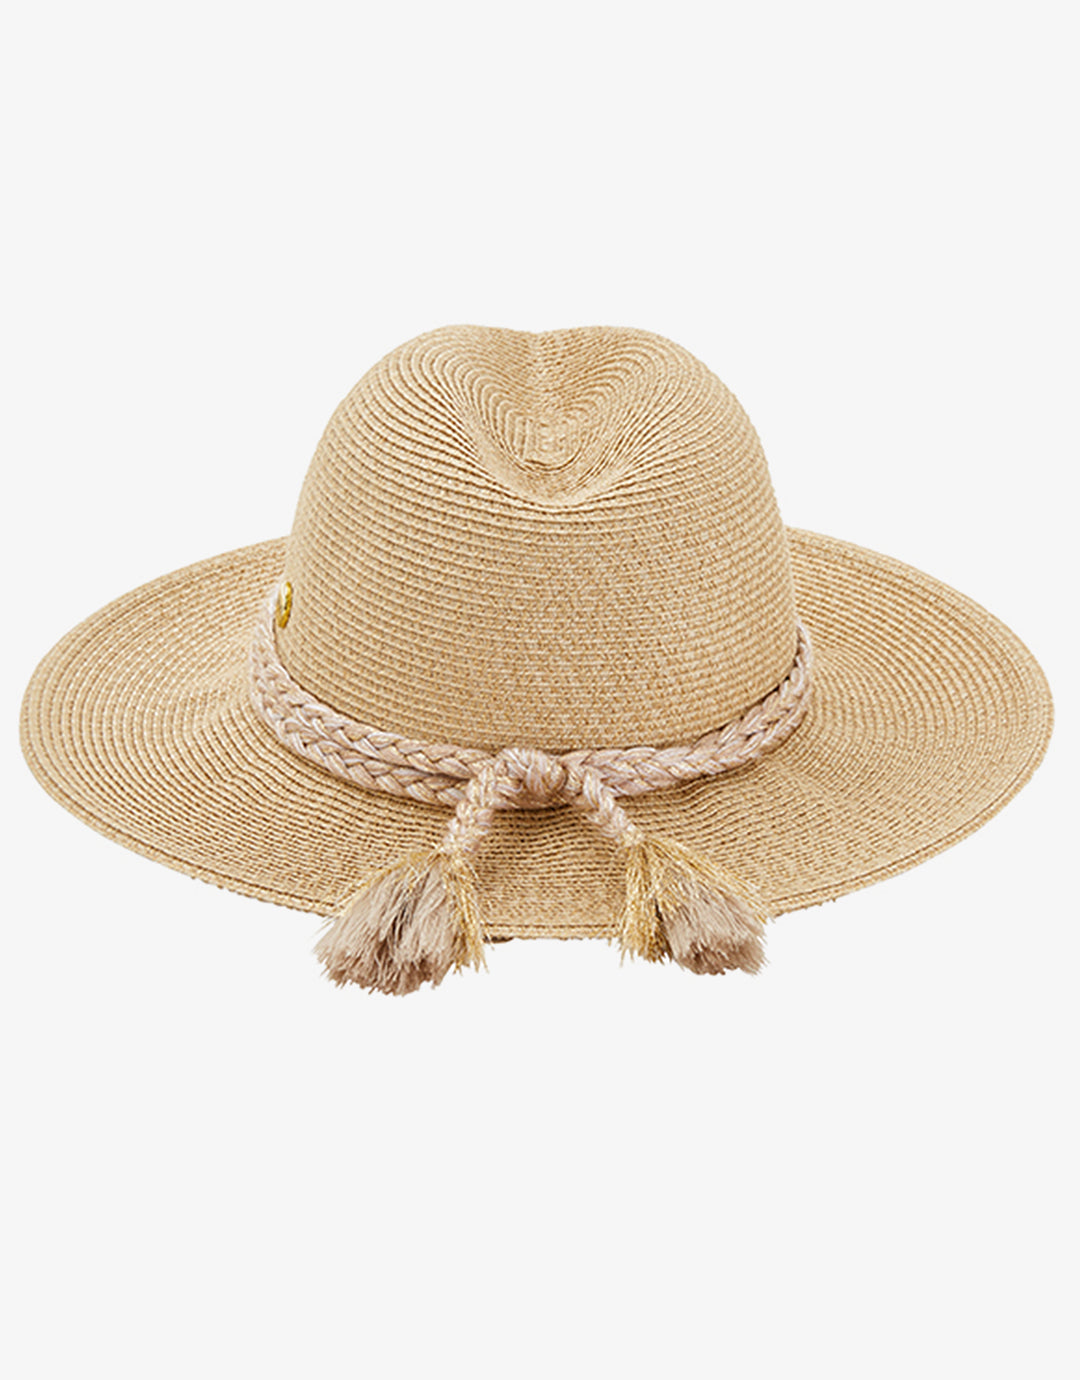 Shady Lady Collapsible Fedora - Gold - Simply Beach UK